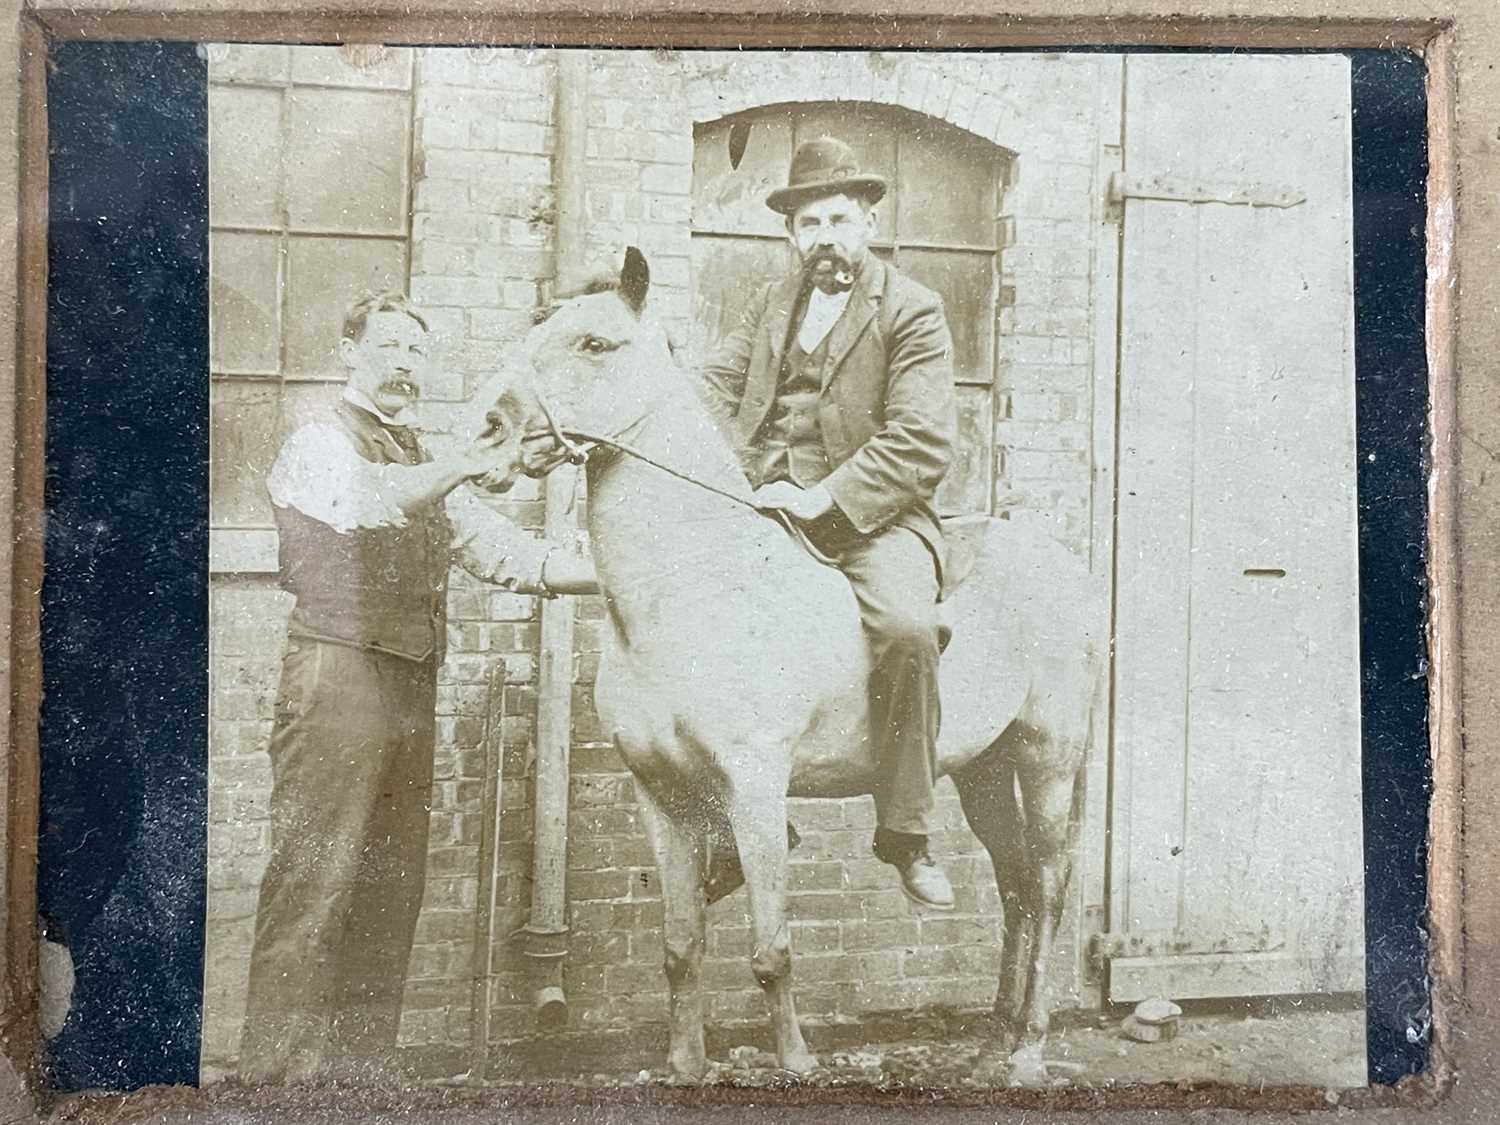 Albumen photograph, gentleman on a horse. 19th century, framed and glazed. Framed size approximately